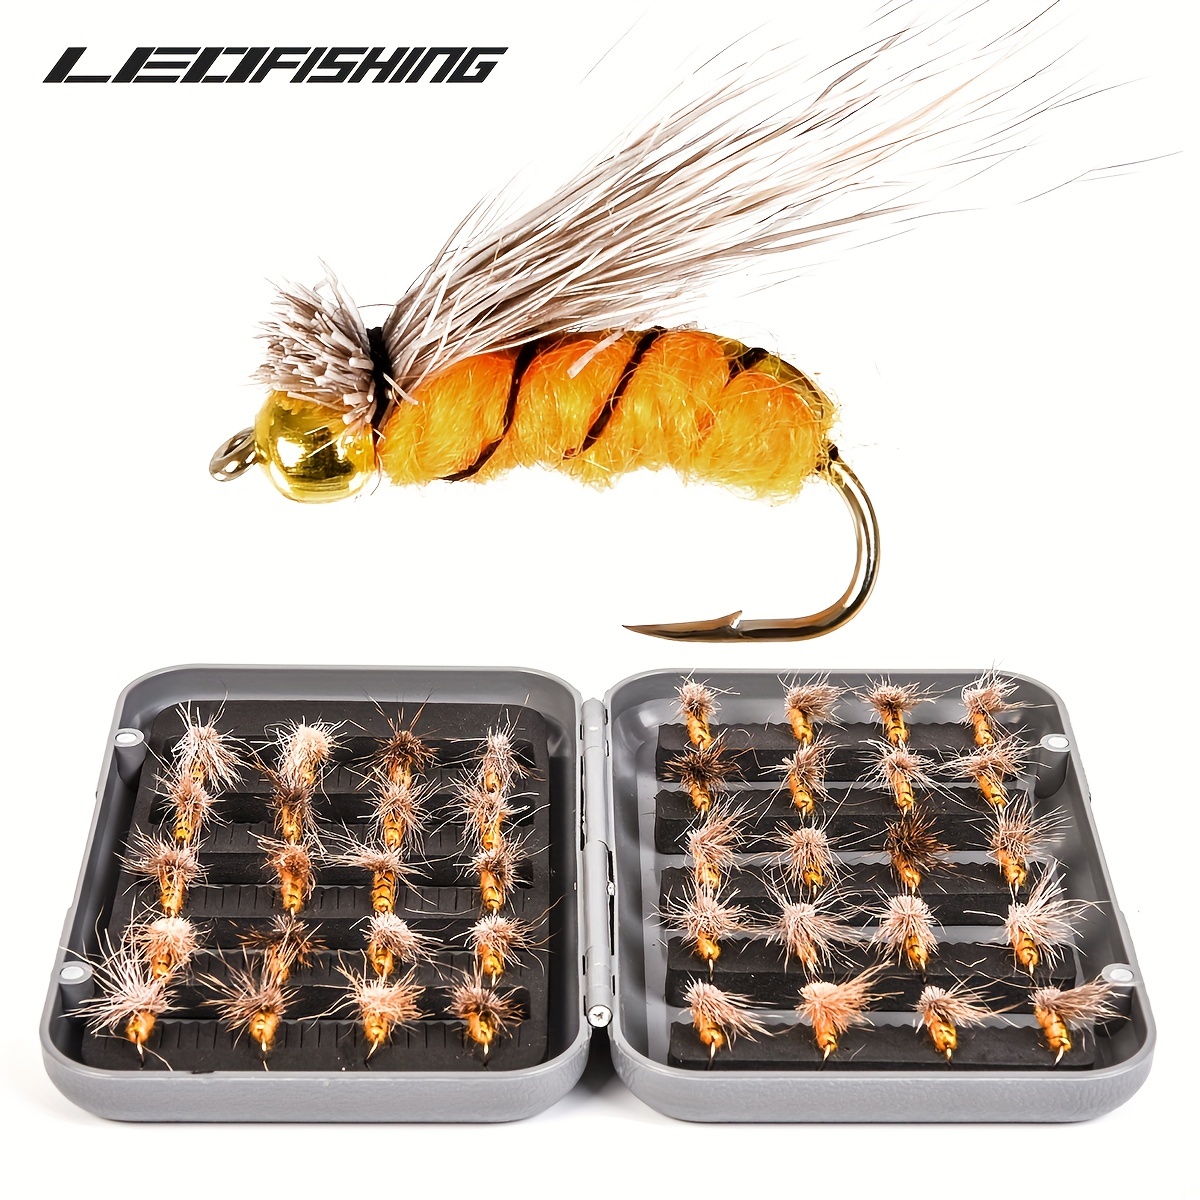 40pcs Leofishing Fly Bee Fishing Lures - Realistic Bionic Insect Bait for  Bass, Salmon, Trout - Freshwater Fishing Tackle with Sharp Hooks